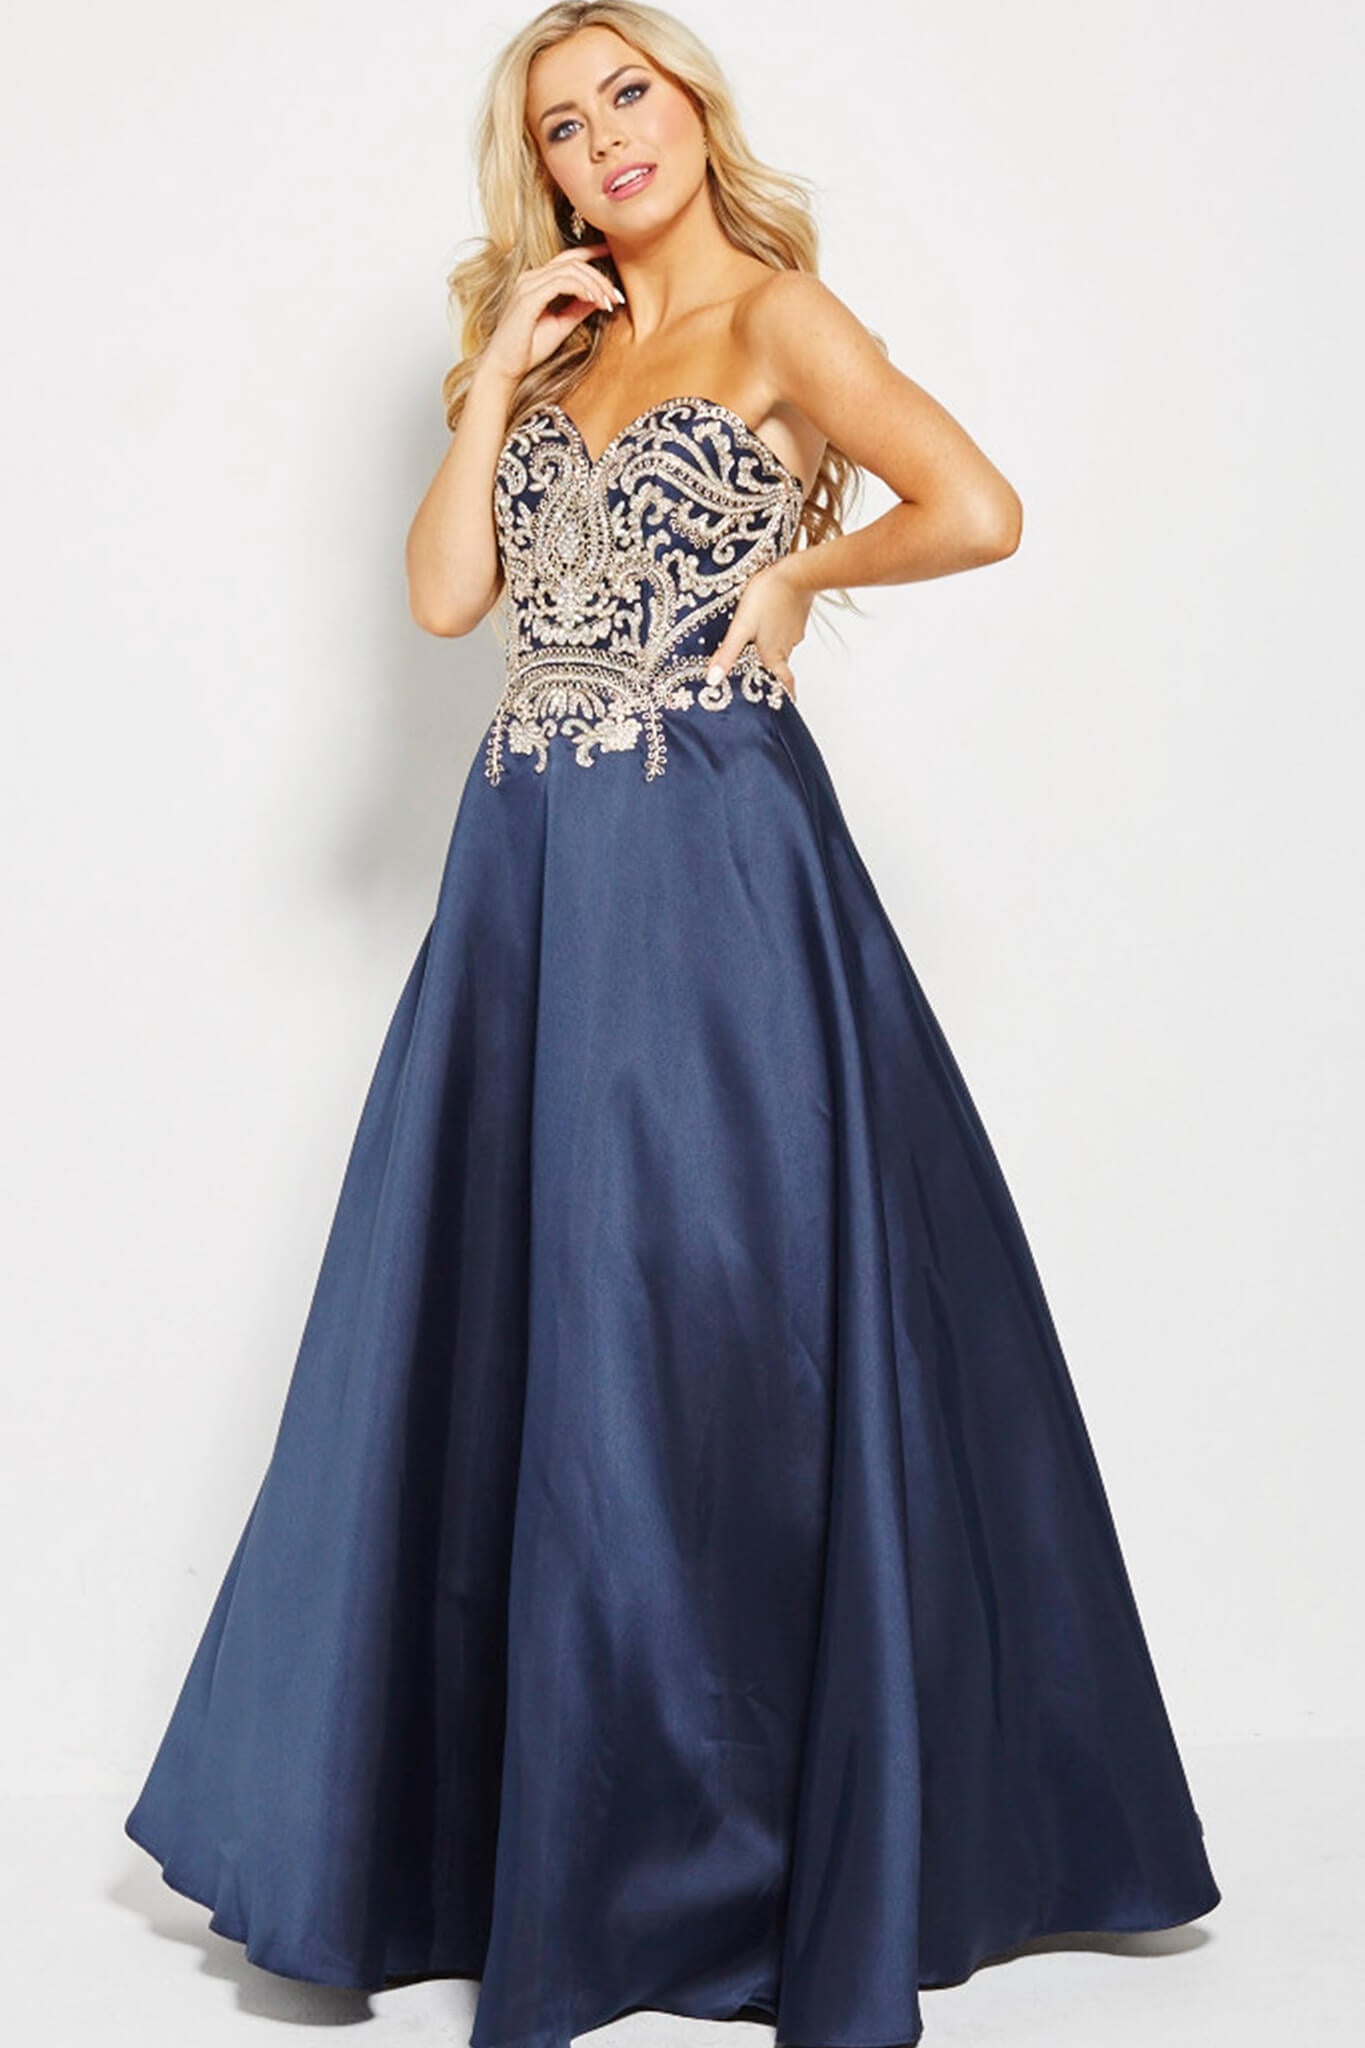 Jovani JVN50070 Size 00 Royal Blue Strapless A Line Prom Dress Embroidered Formal Gown